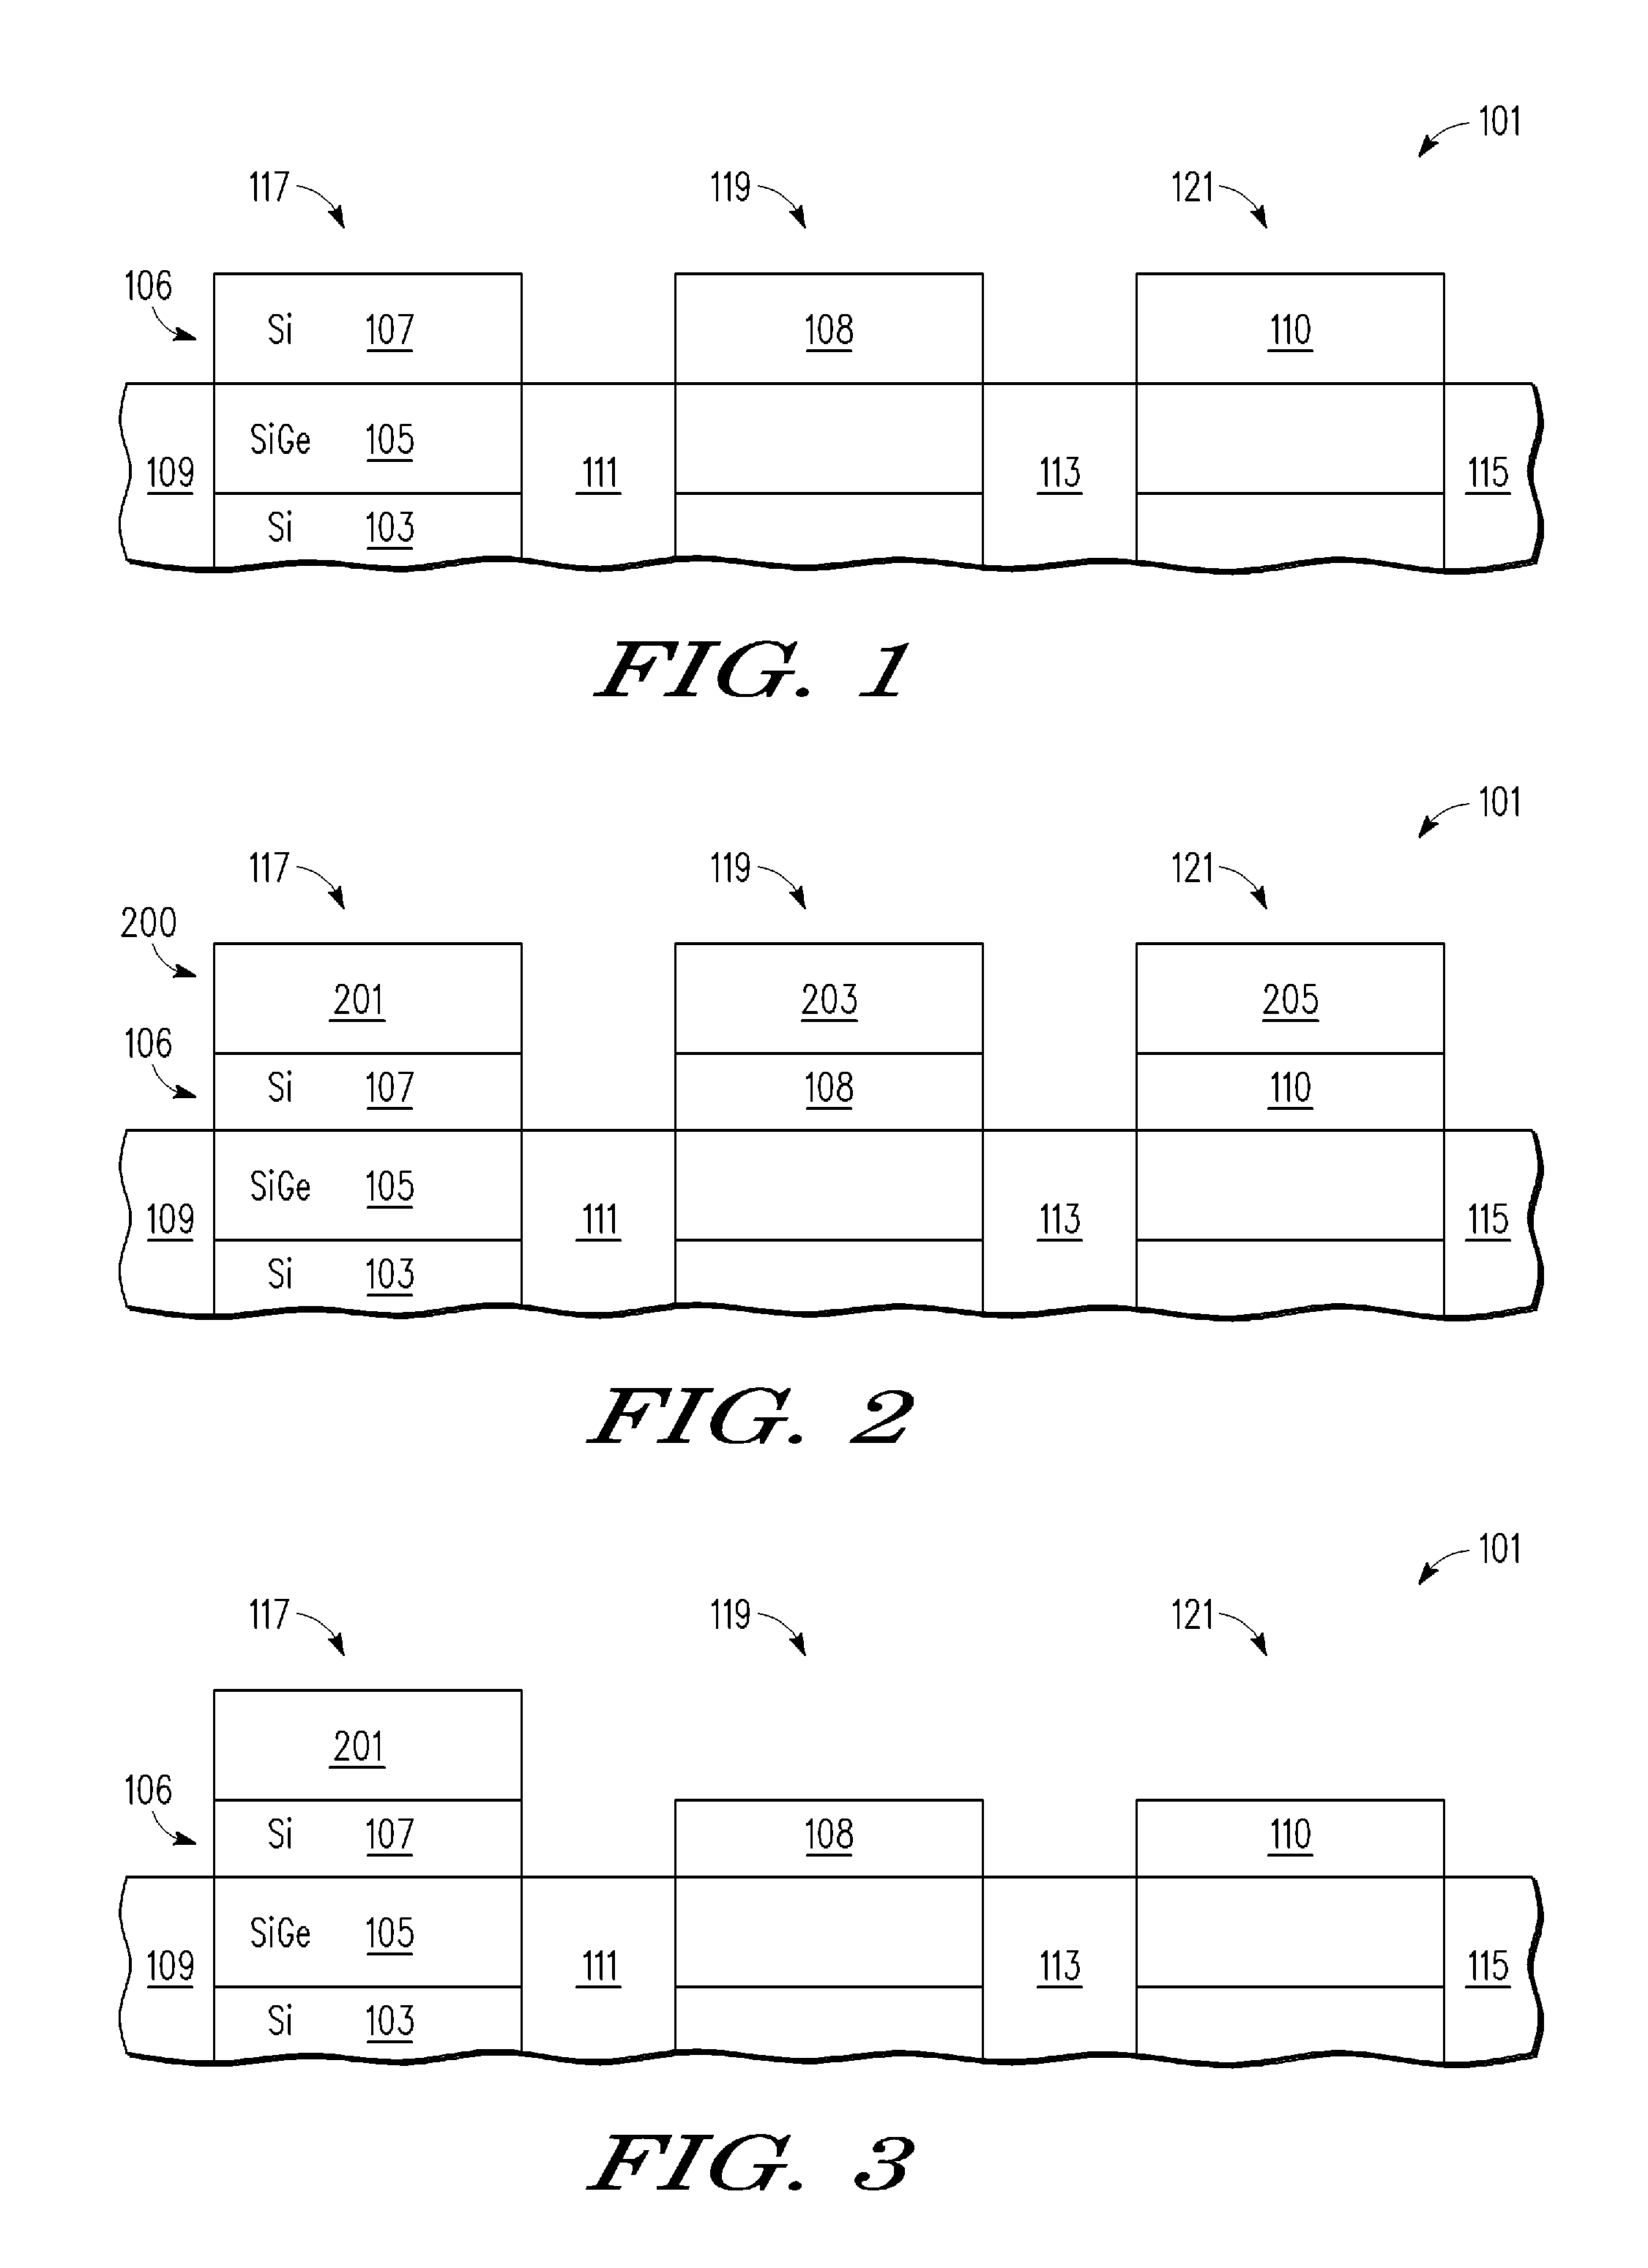 Semiconductor devices with different dielectric thicknesses